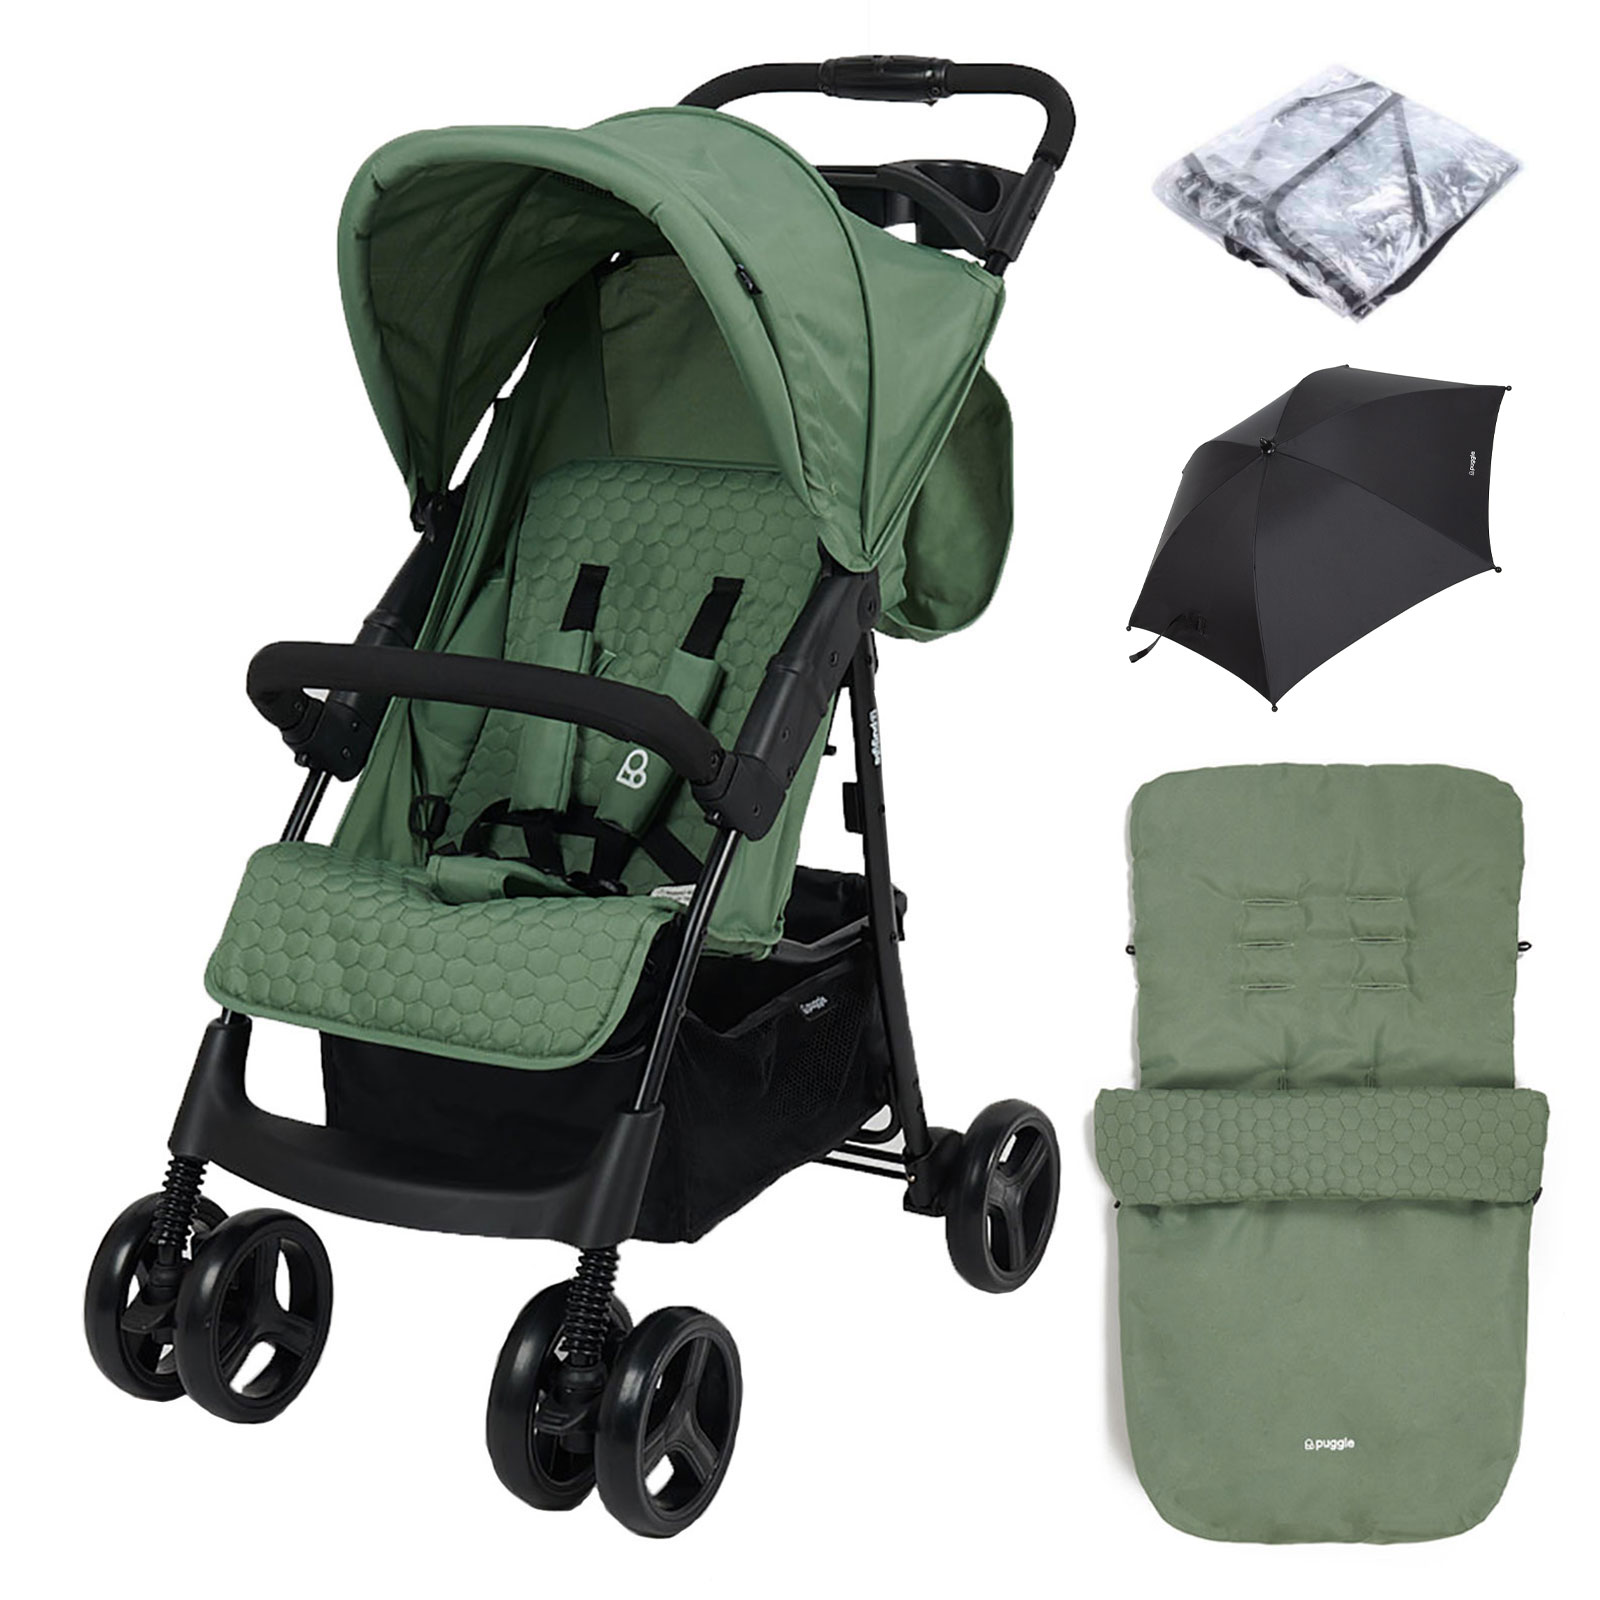 Puggle Starmax Pushchair Stroller with Raincover, Universal Footmuff and Parasol – Sage Green